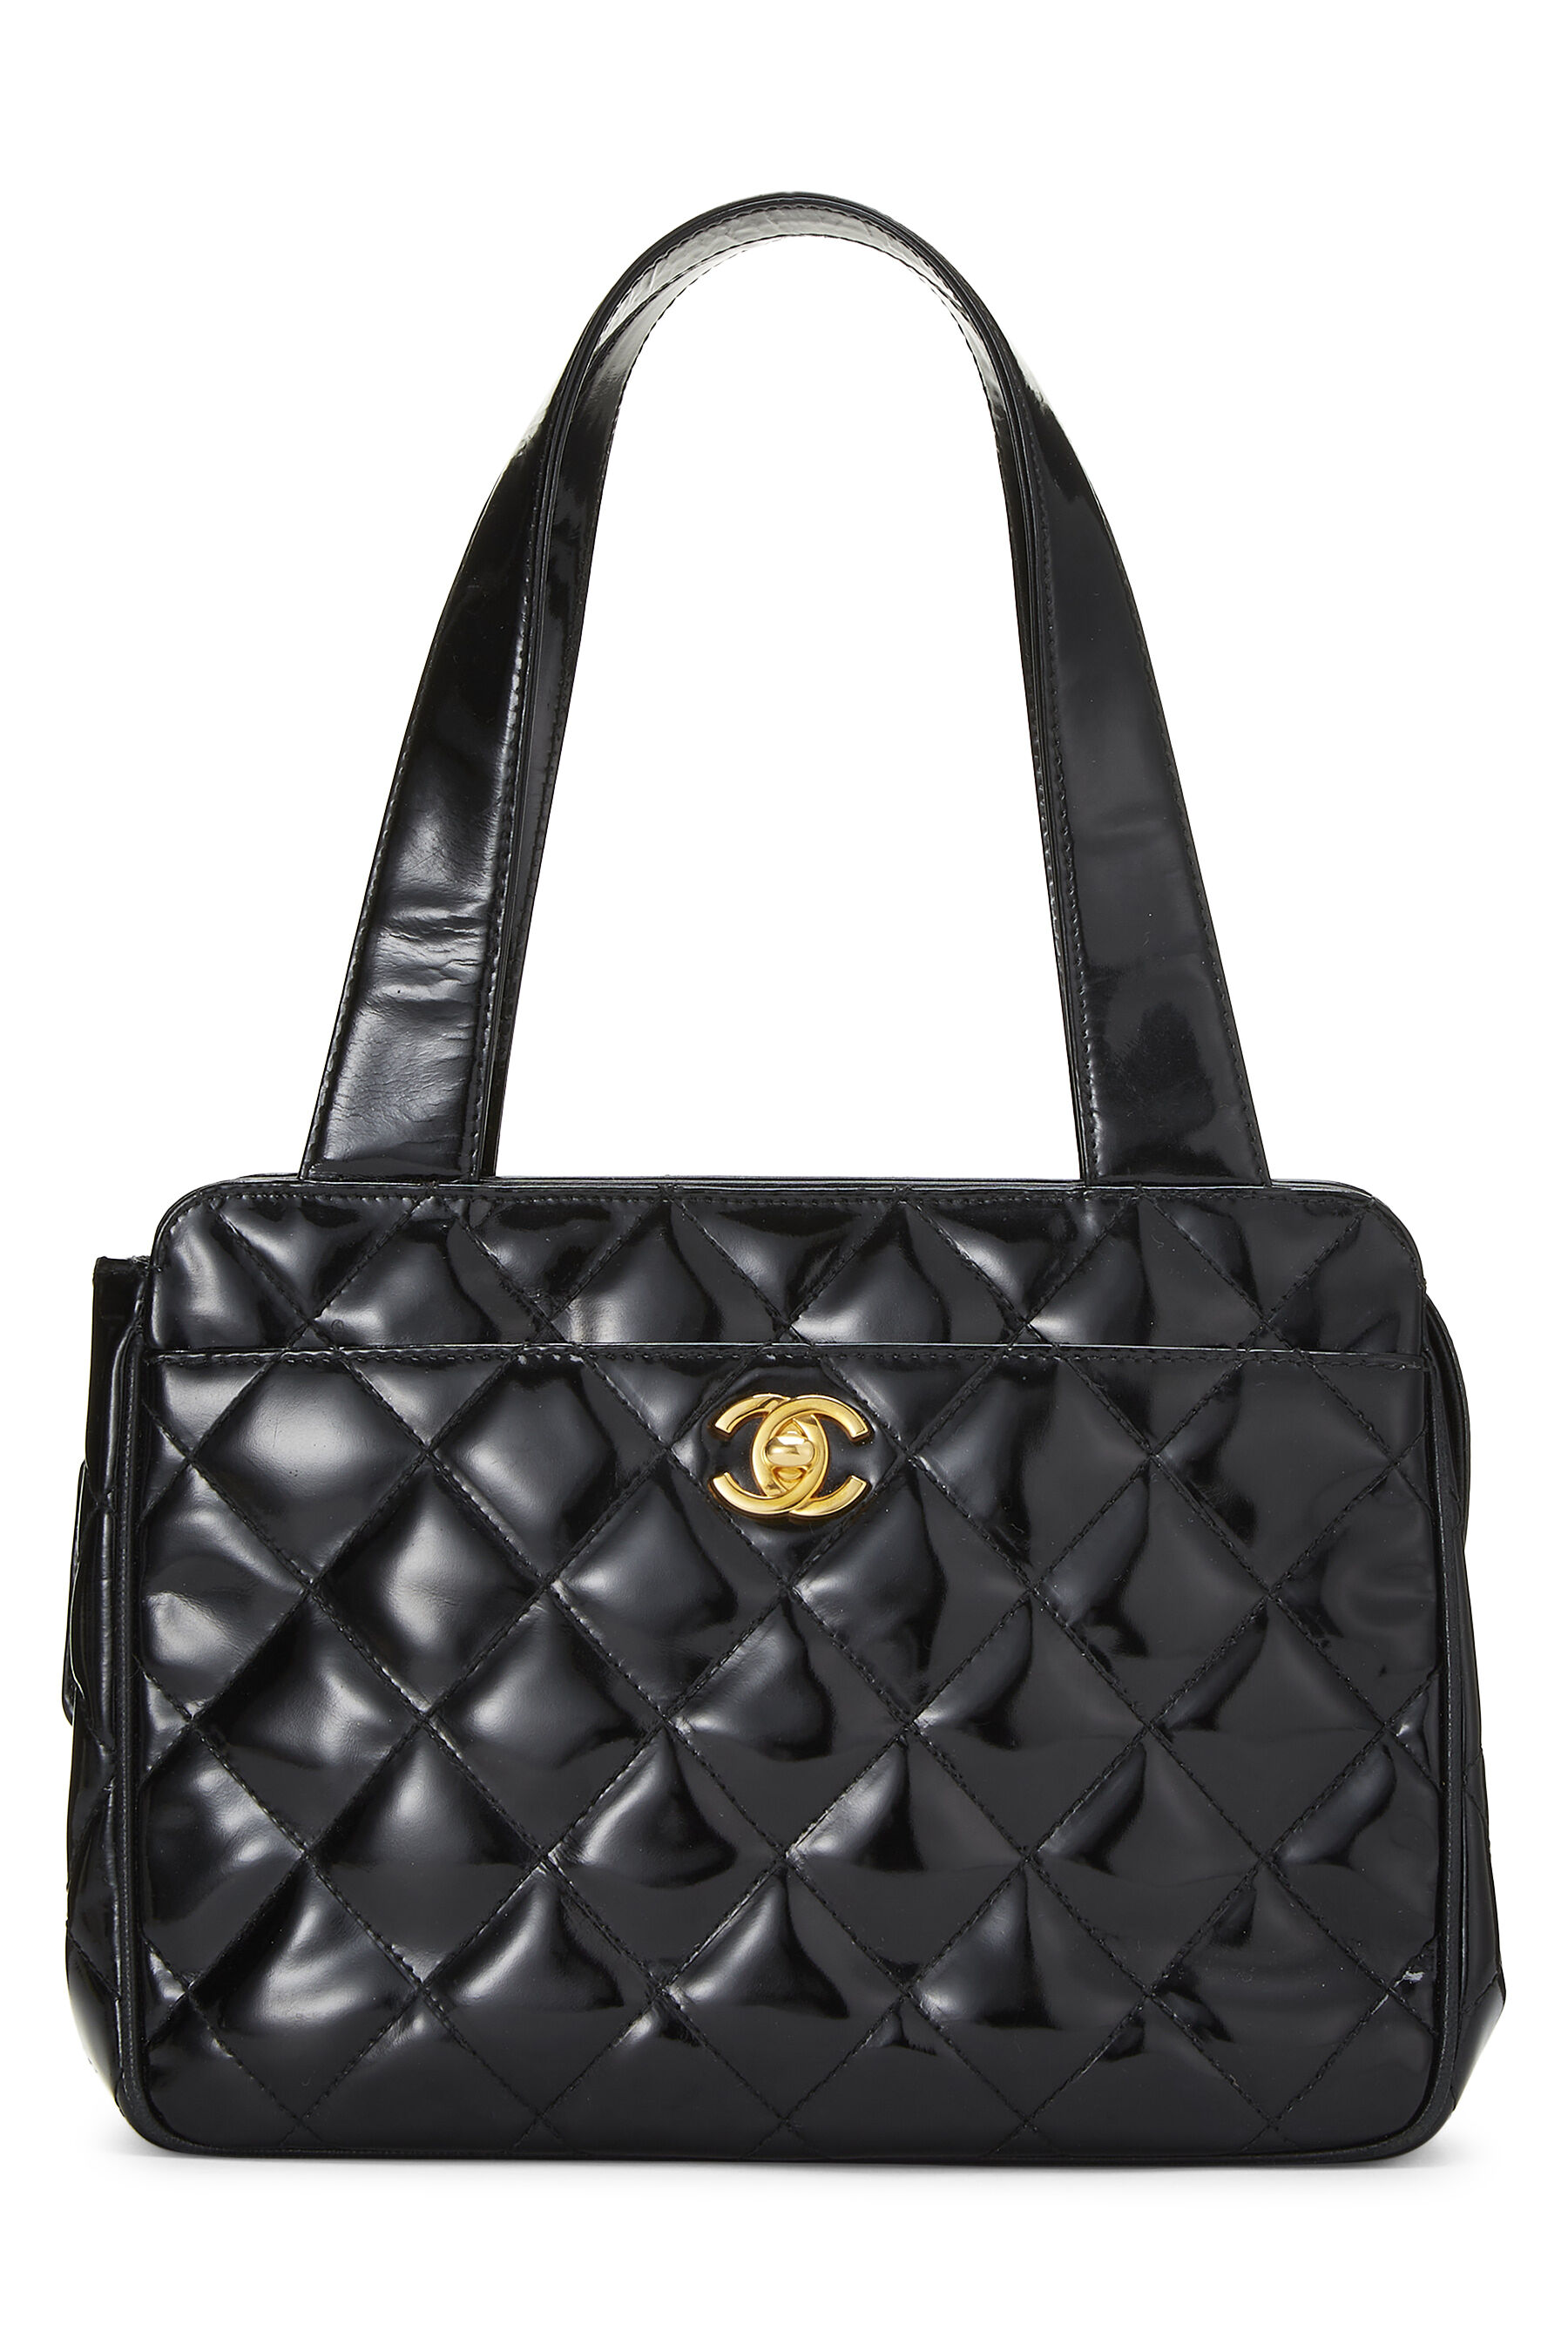 Black Quilted Patent Leather Classic Square Flap Mini